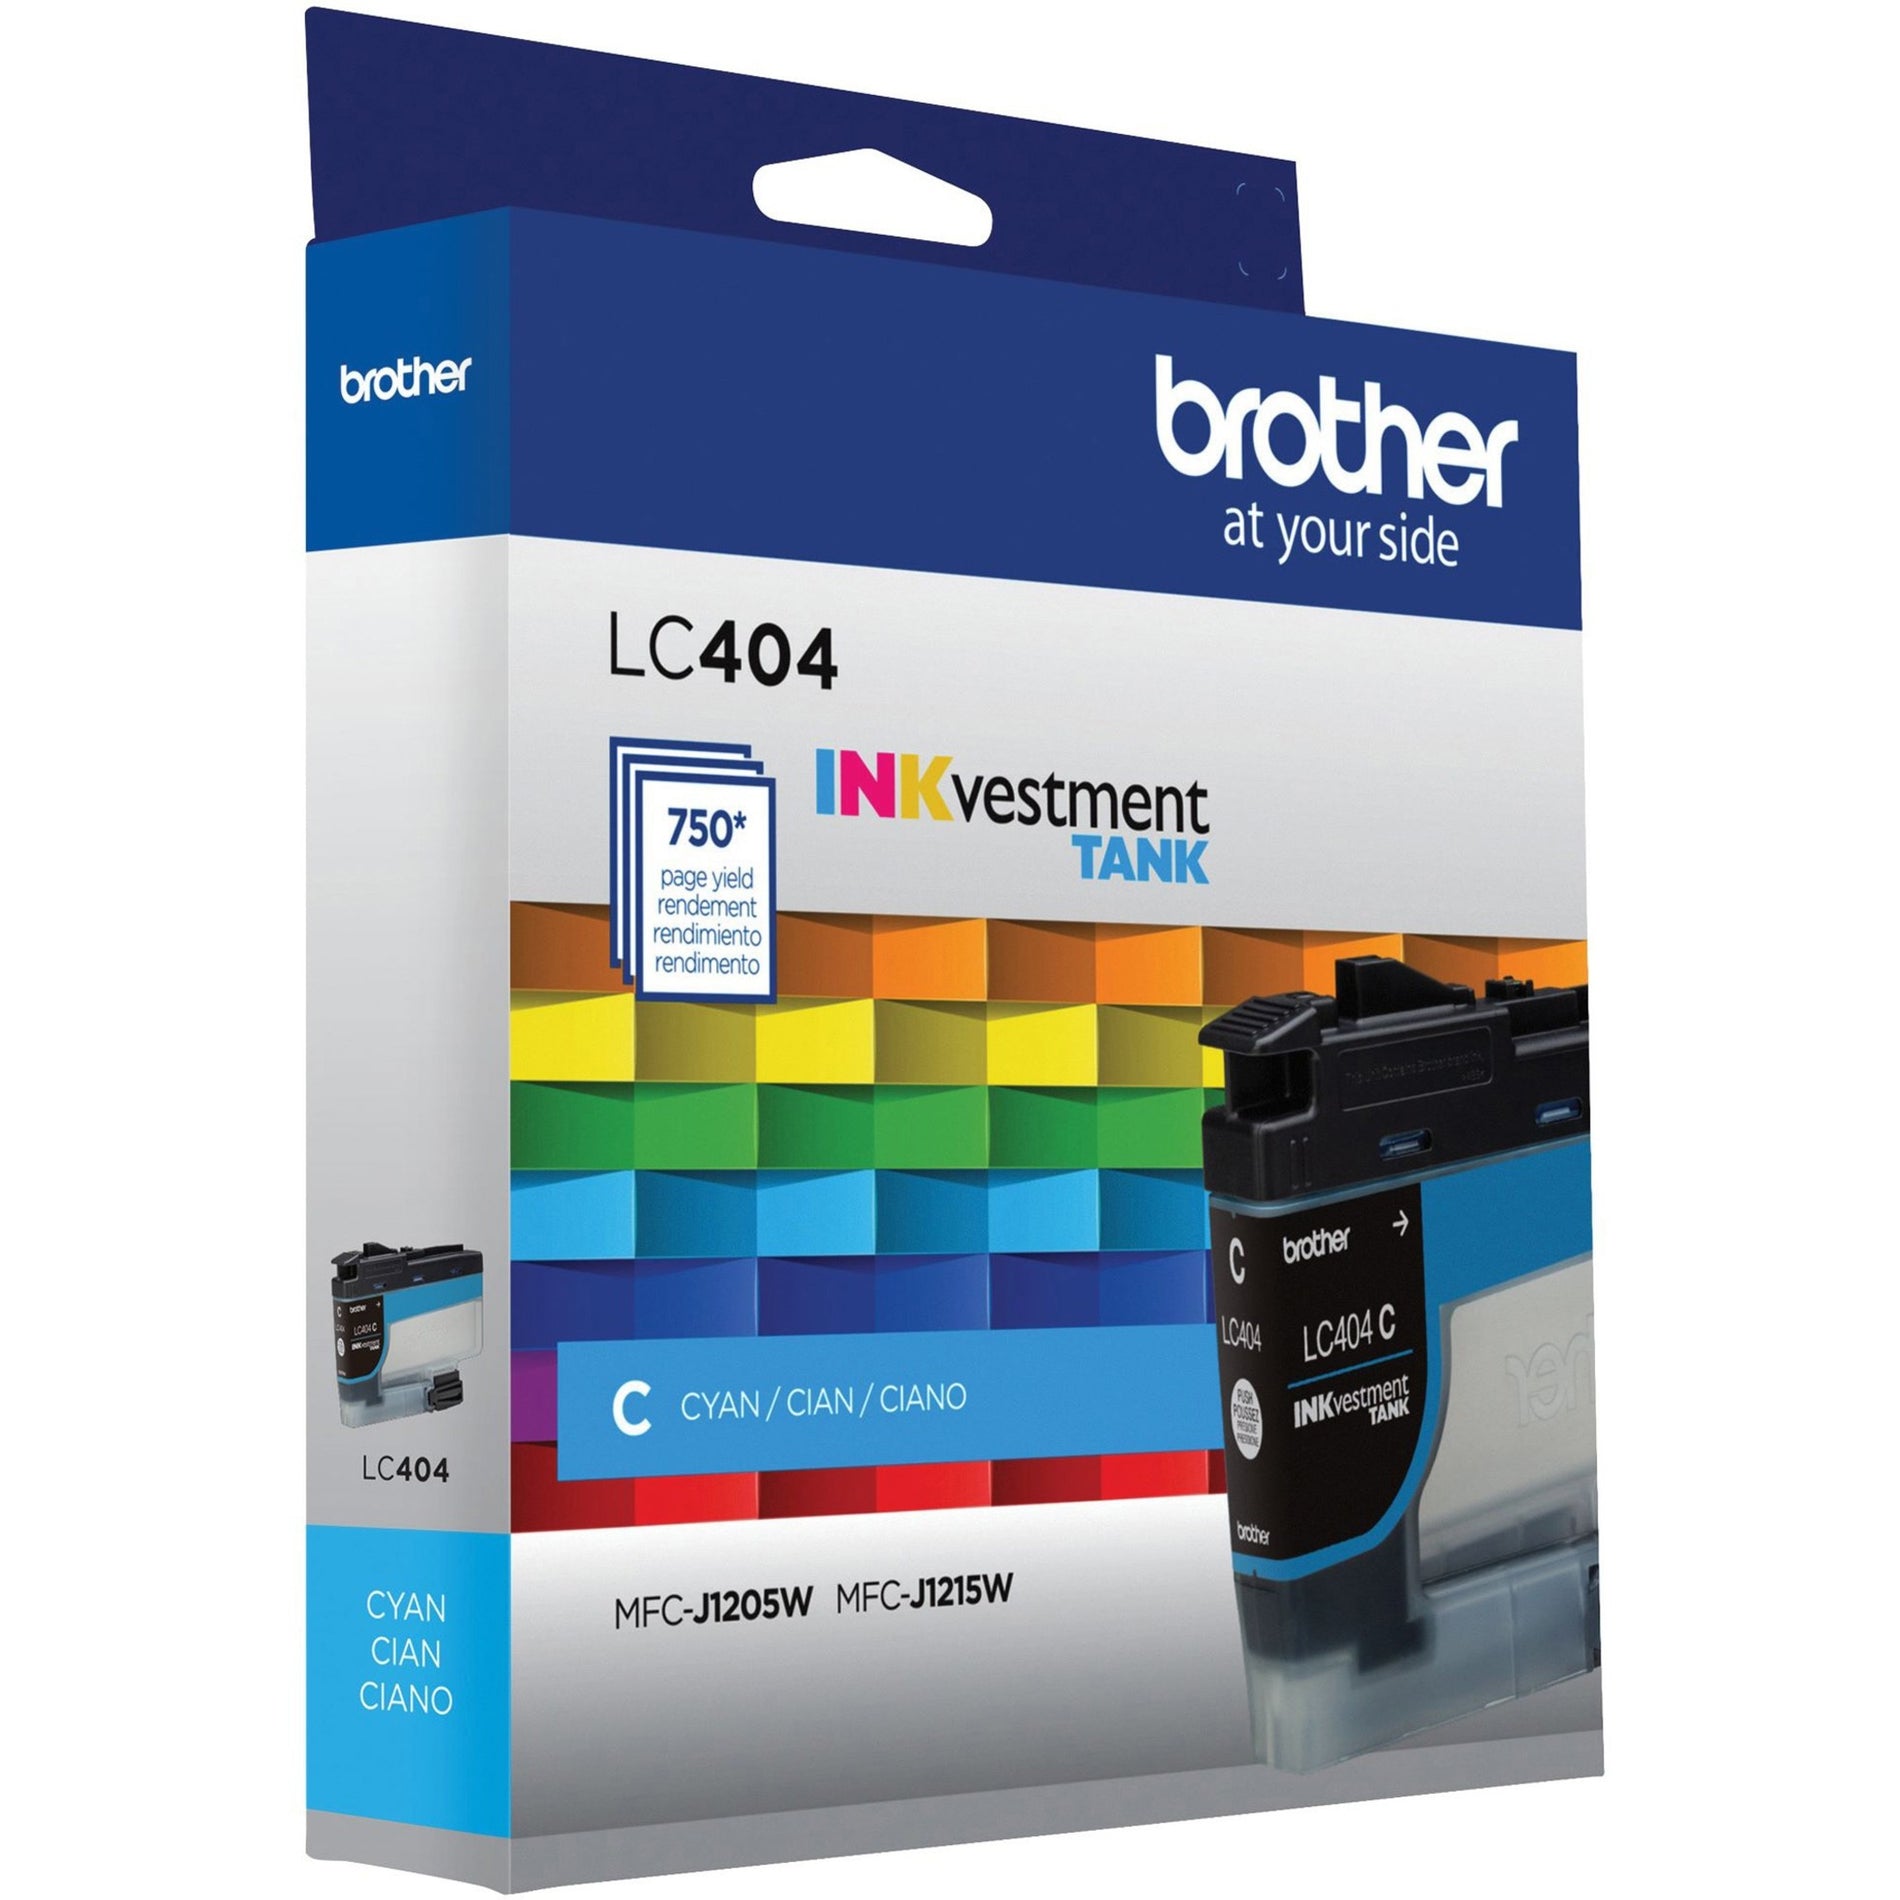 Brother LC404CS INKvestment Tank Ink Cartridge, Cyan - 750 Pages Yield